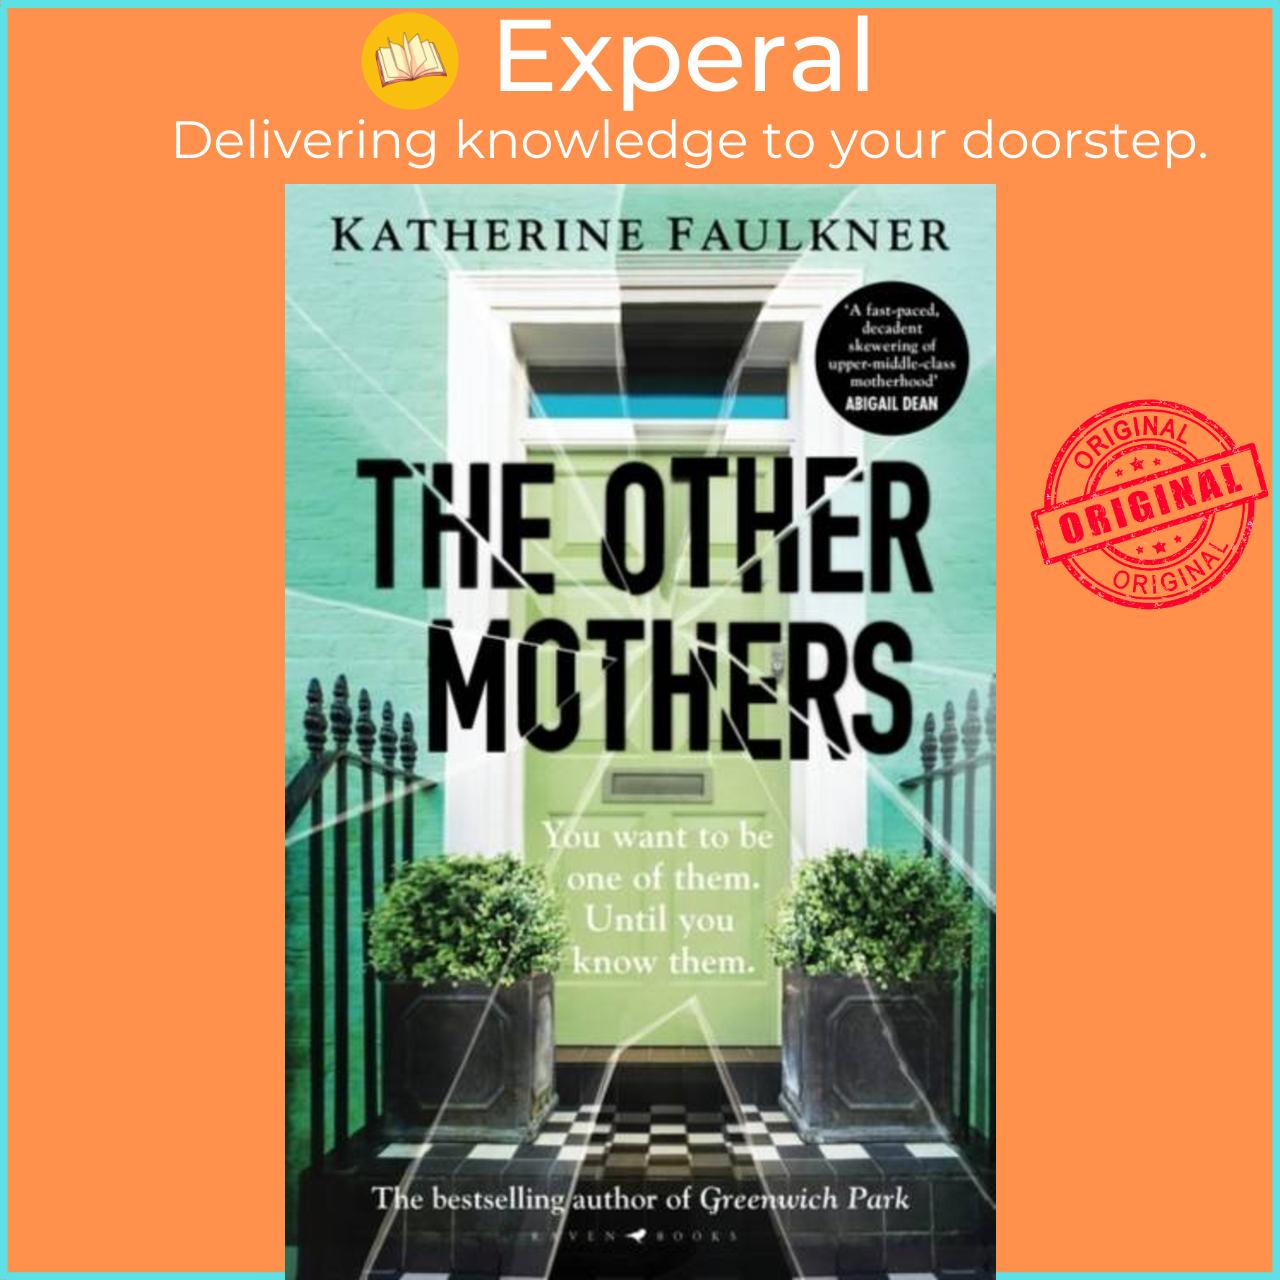 Sách - The Other Mothers - the unguessable, unputdownable new thriller fro by Katherine Faulkner (UK edition, hardcover)